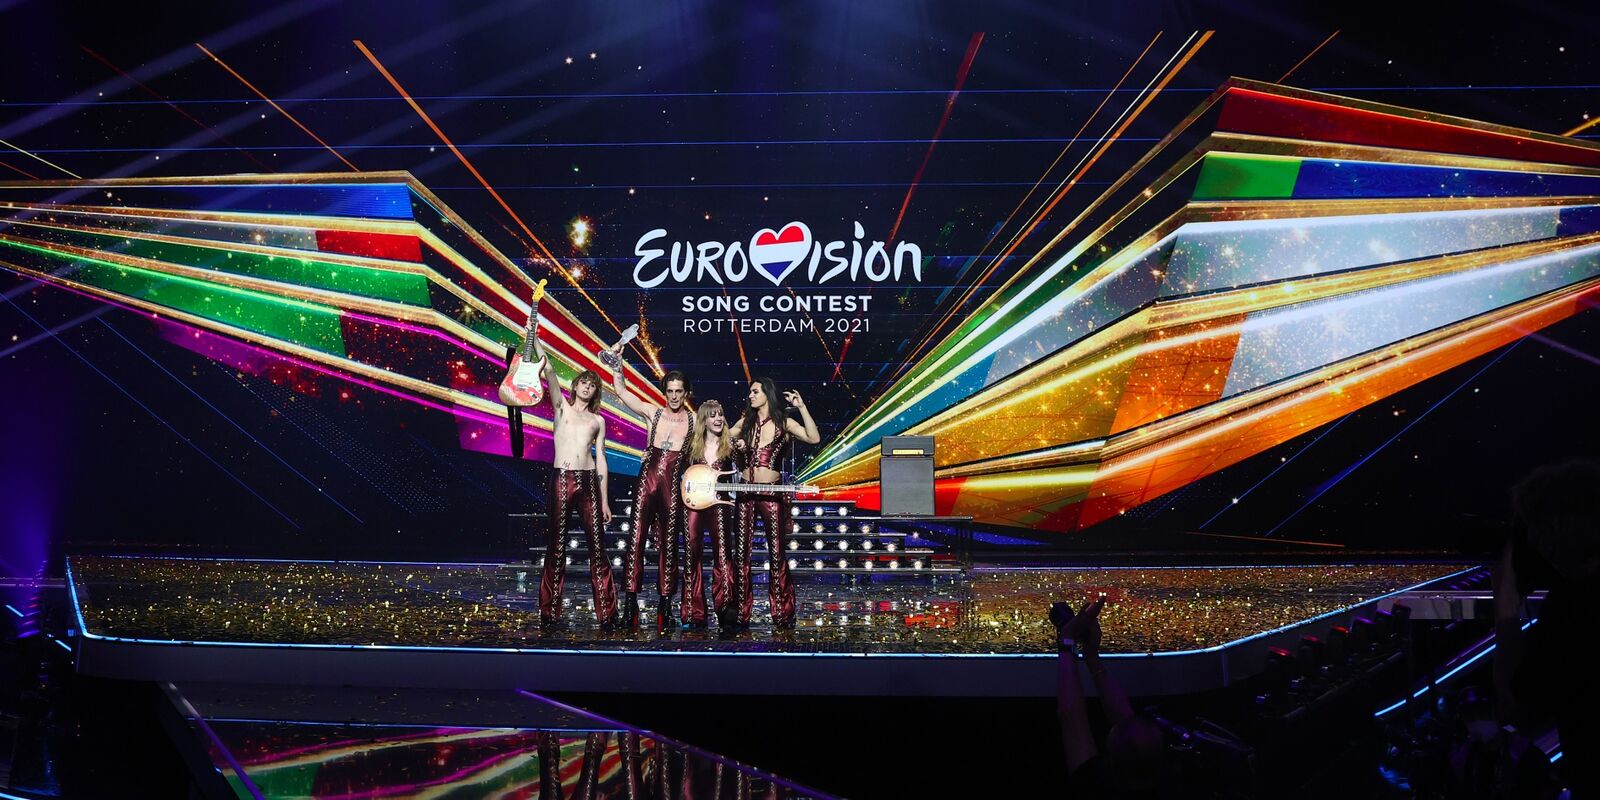 Måneskin won the Eurovision Song Contest with the song "Zitti e buoni".